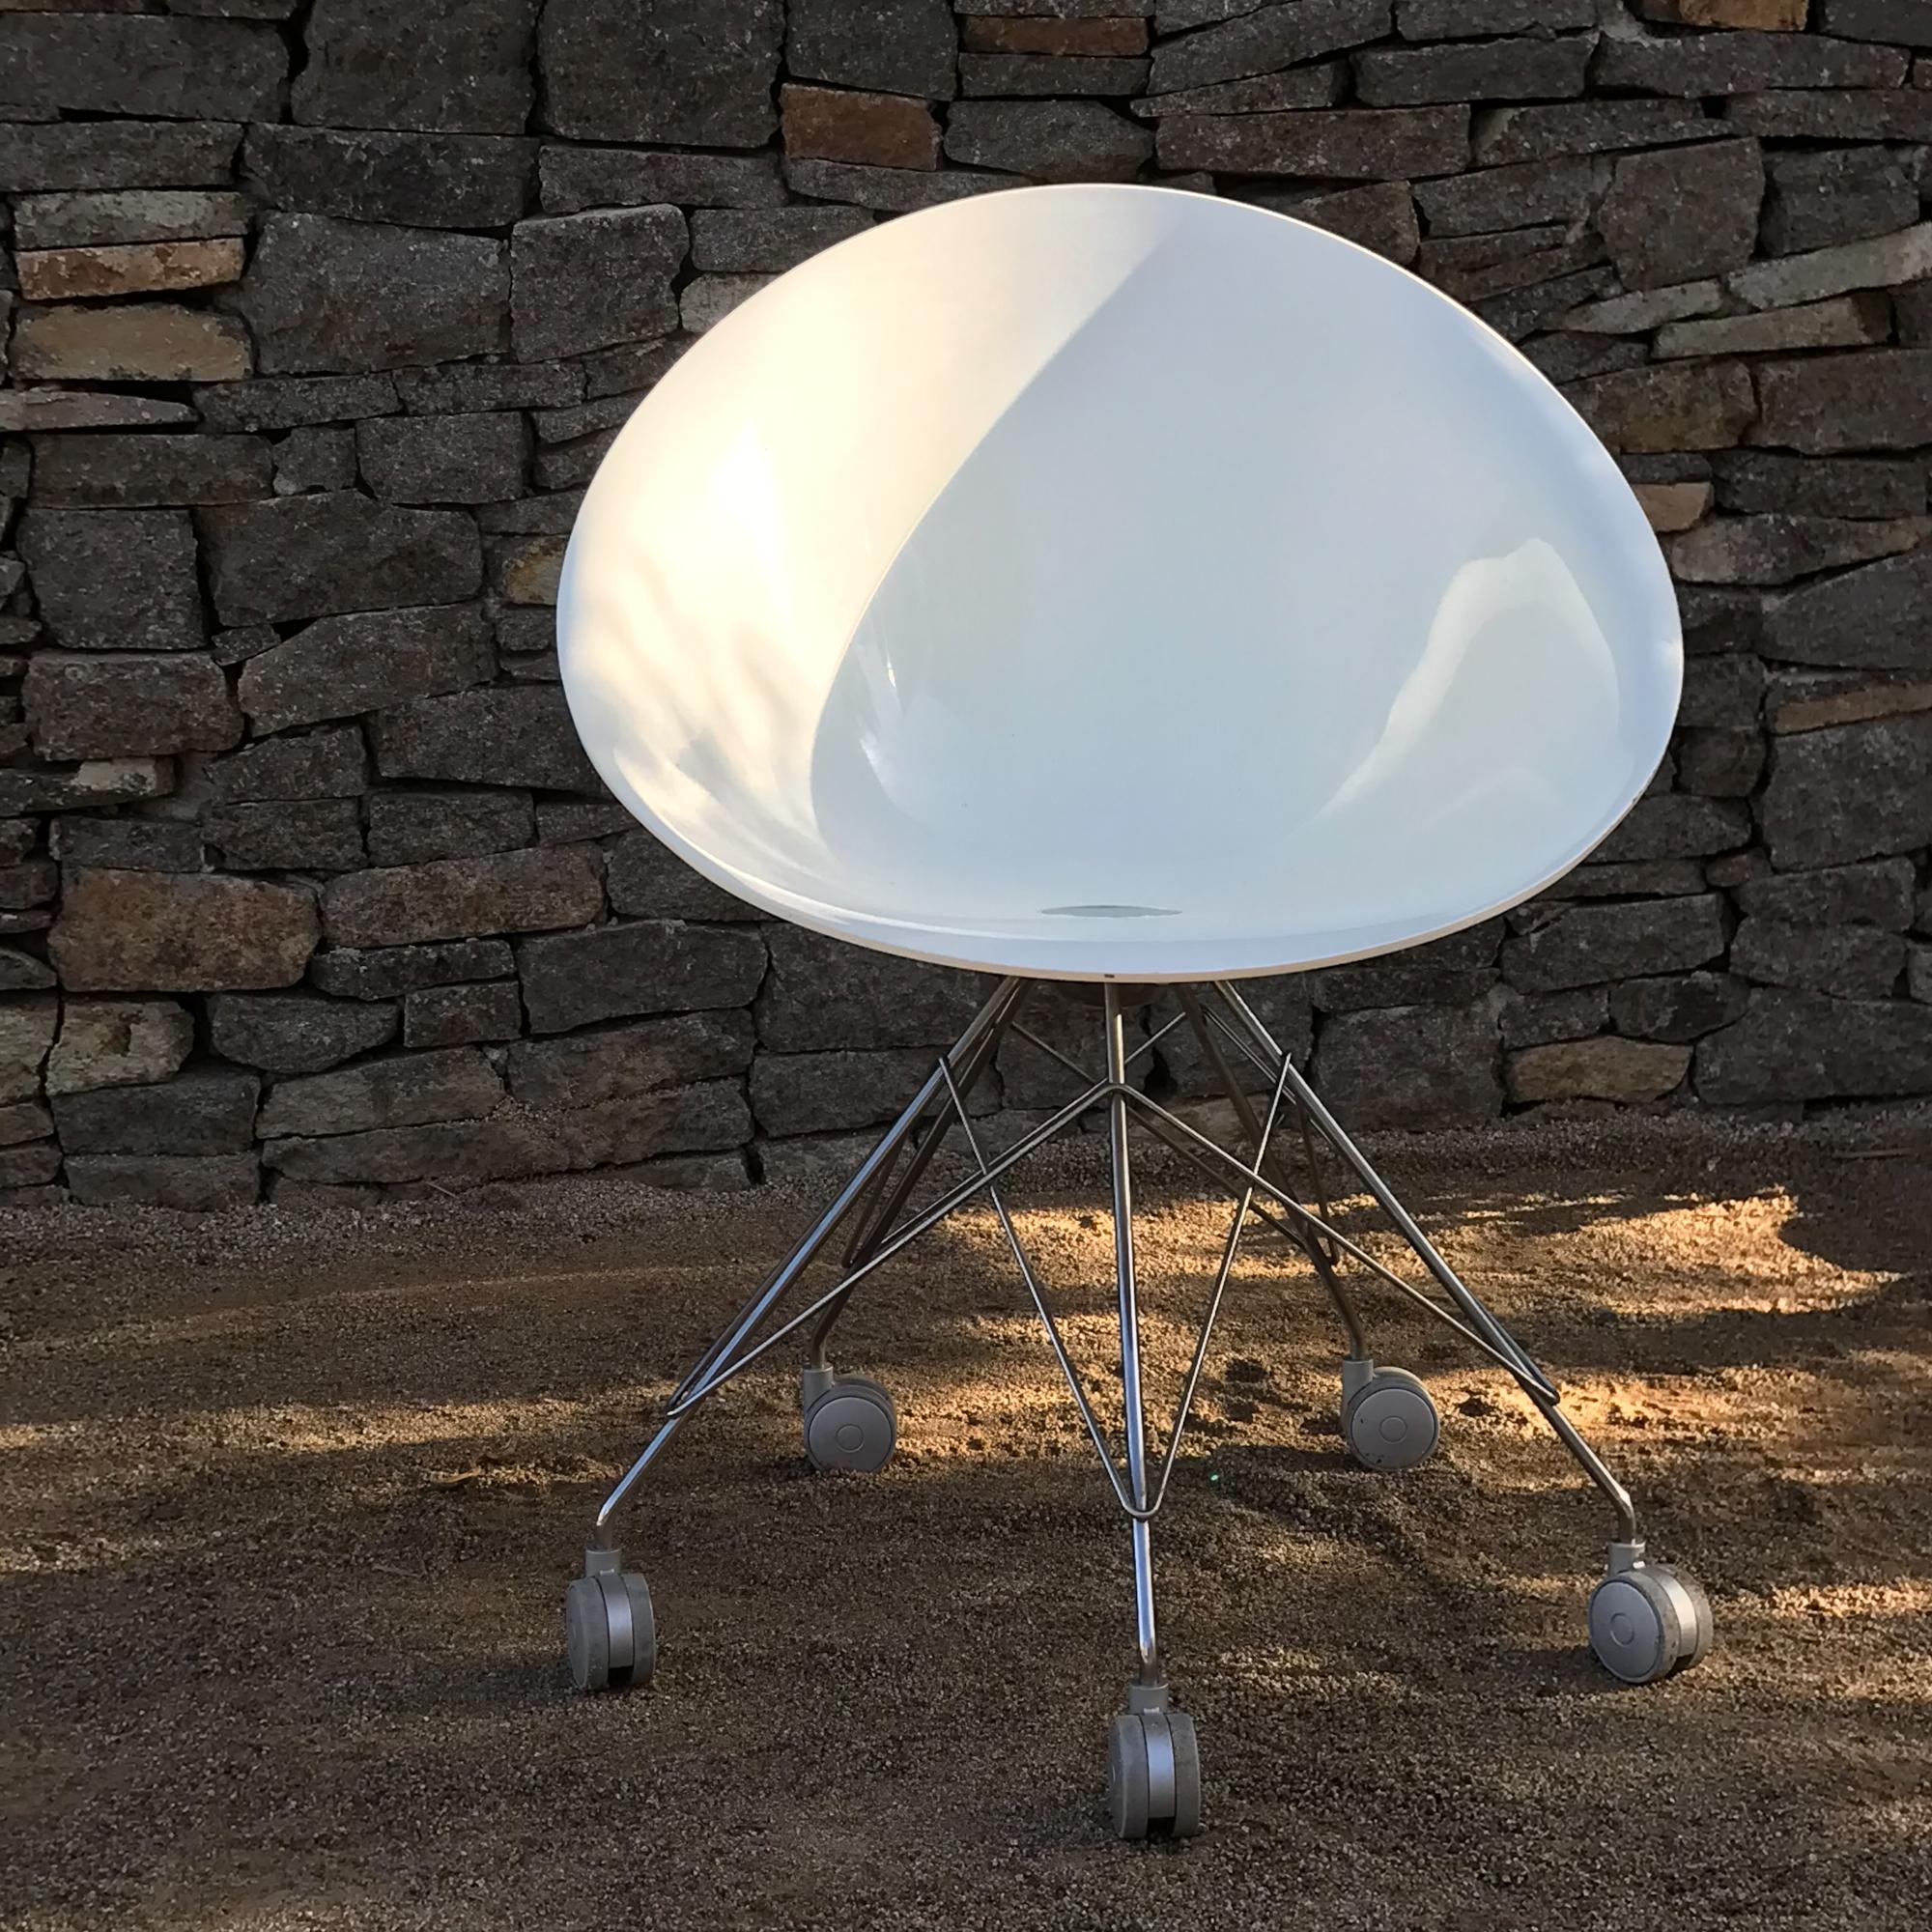 AMBIANIC presents
Fantastic Eros Eiffel Swivel White Wire Base Chair on Wheels by Philippe Starck for Kartell
 32 H x 23.5 x 23.75 W  Seat Height 18.25
Single Chair with Eiffel Tower base on wheels designed by Philippe Starck for Kartell,